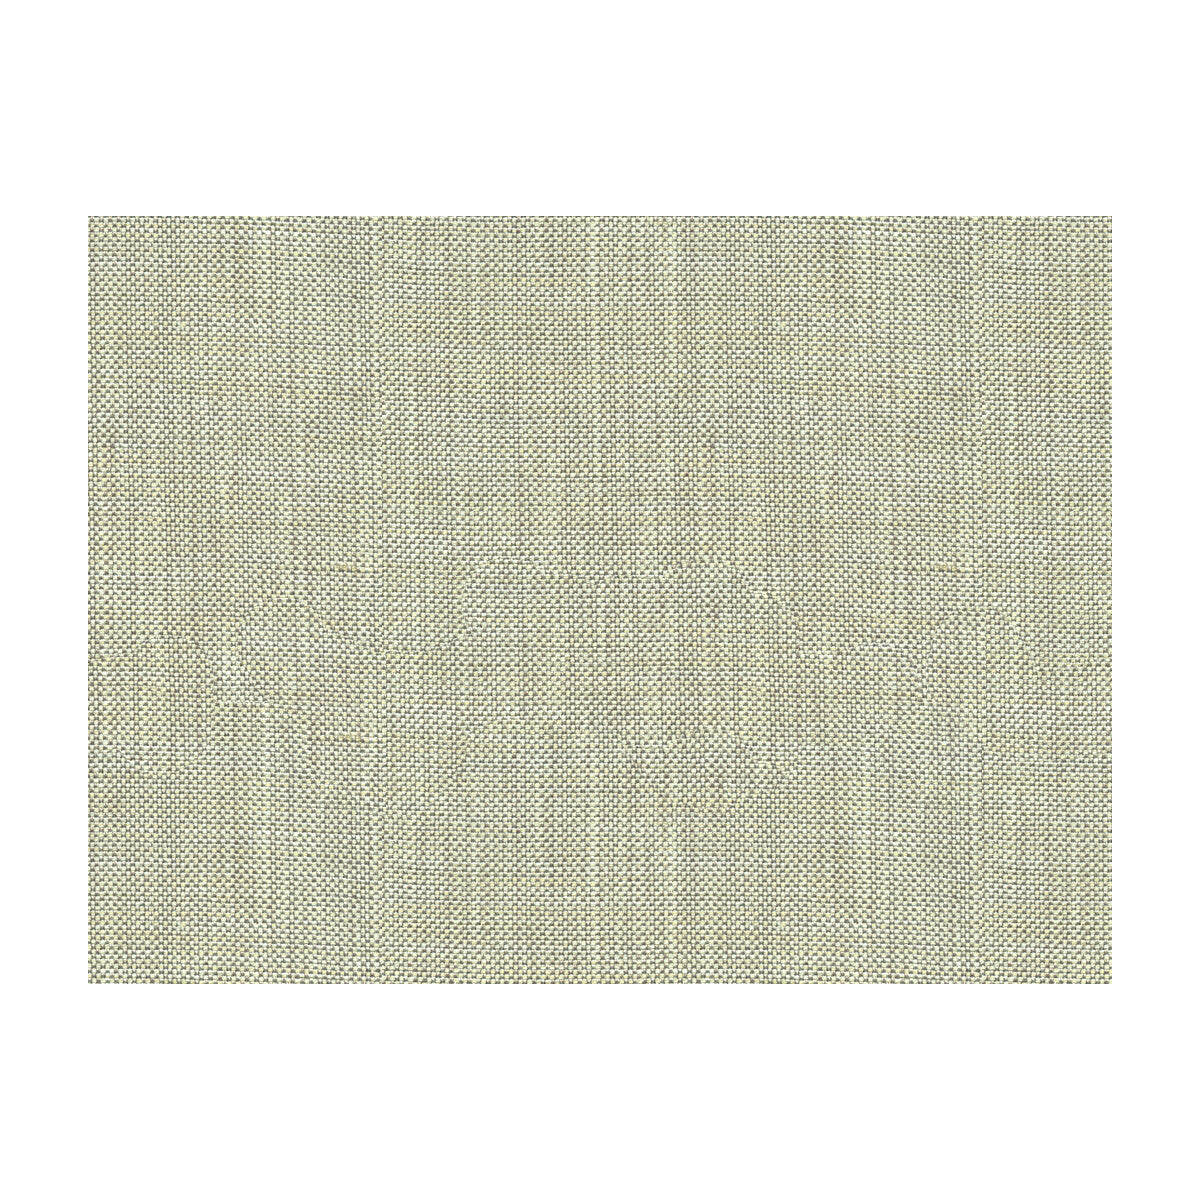 Kravet Basics fabric in 30299-2111 color - pattern 30299.2111.0 - by Kravet Basics in the Perfect Plains collection